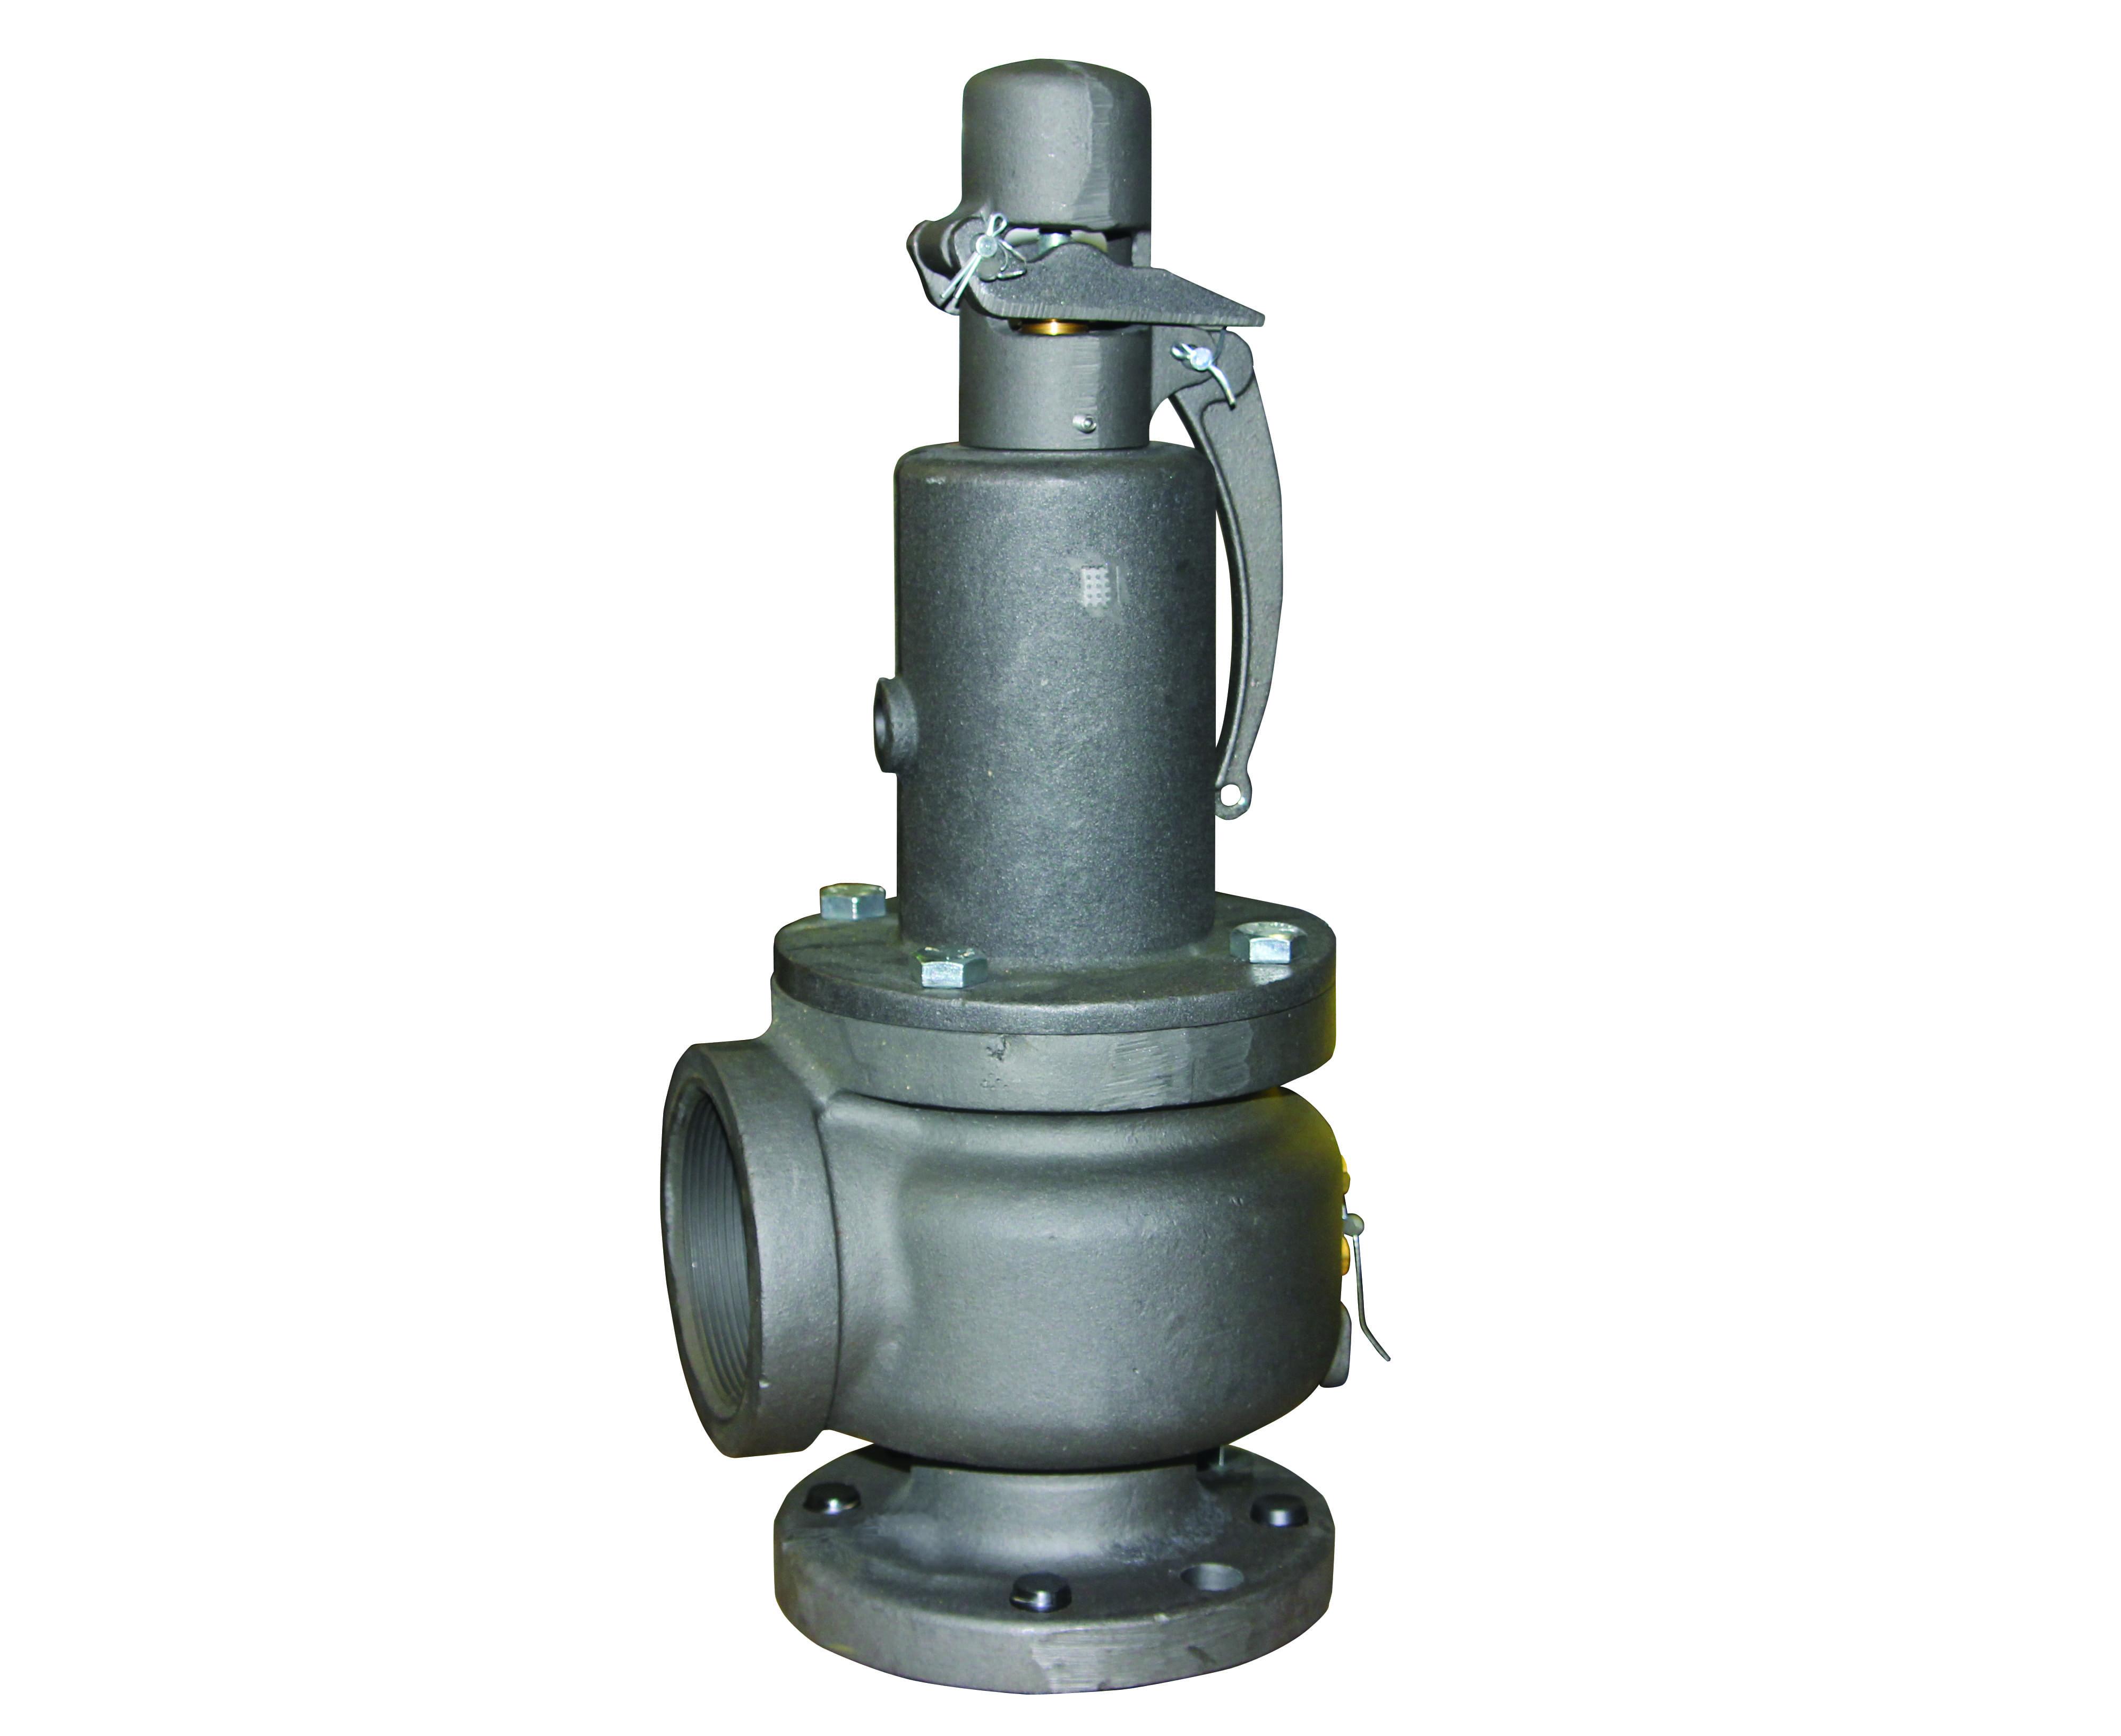 Preview image for Apollo ASME Section I Steam Cast Iron Safety Relief Valve, 2-1/2" x 4" (Flange x FNPT)